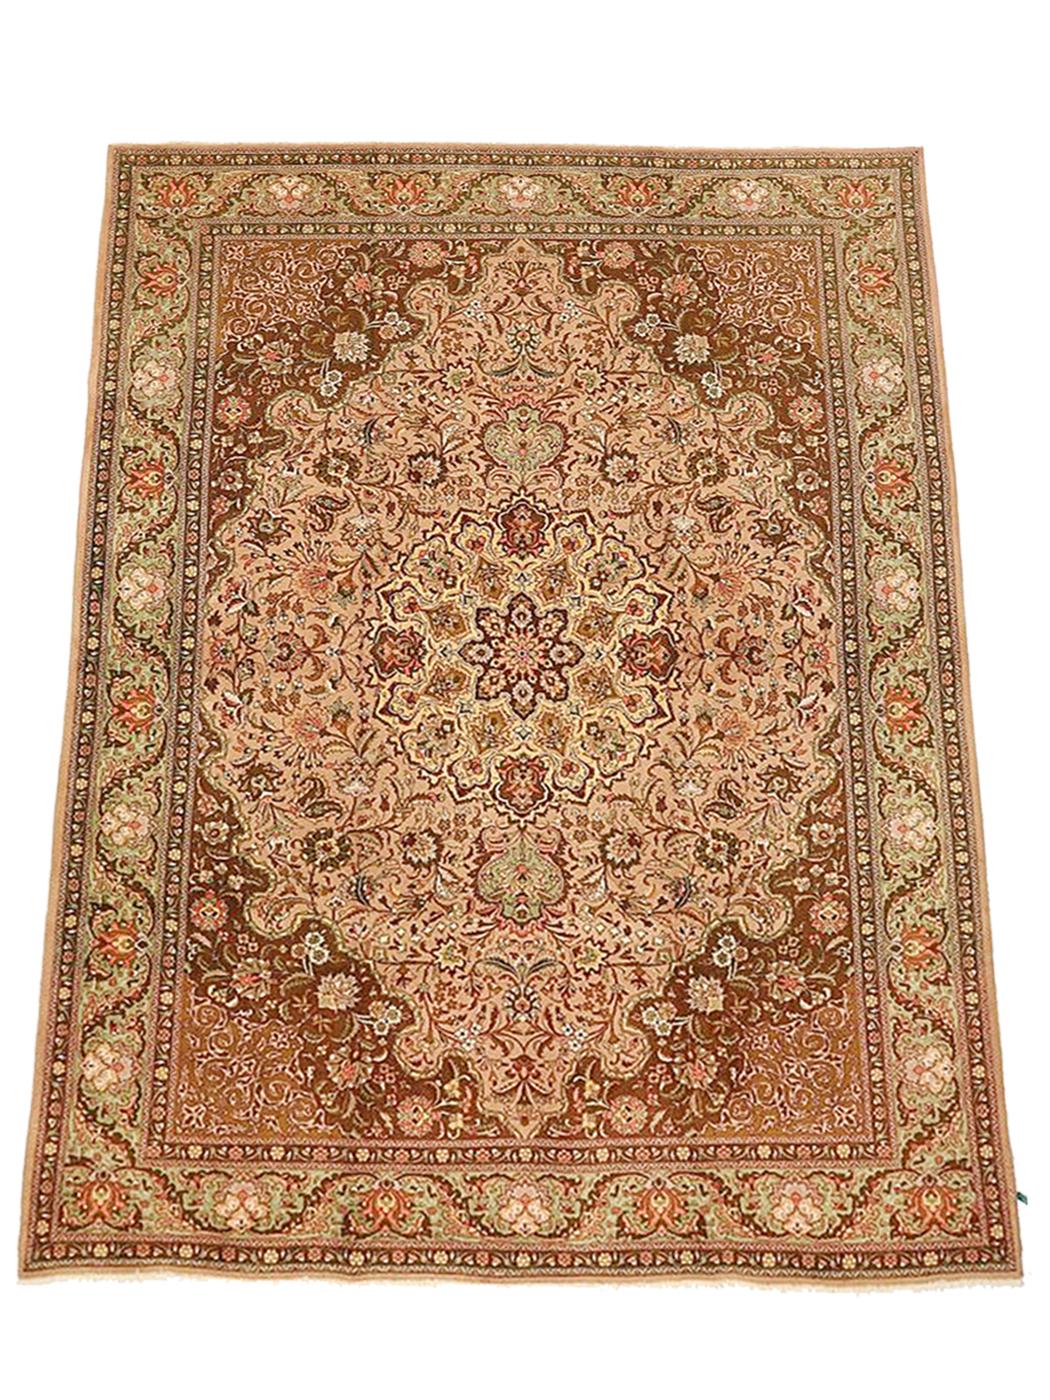 Vintage Persian rug handwoven from the finest sheep’s wool and colored with all-natural vegetable dyes that are safe for humans and pets. It’s a traditional Tabriz weaving featuring a lovely ensemble of floral designs in brown and pink over an ivory